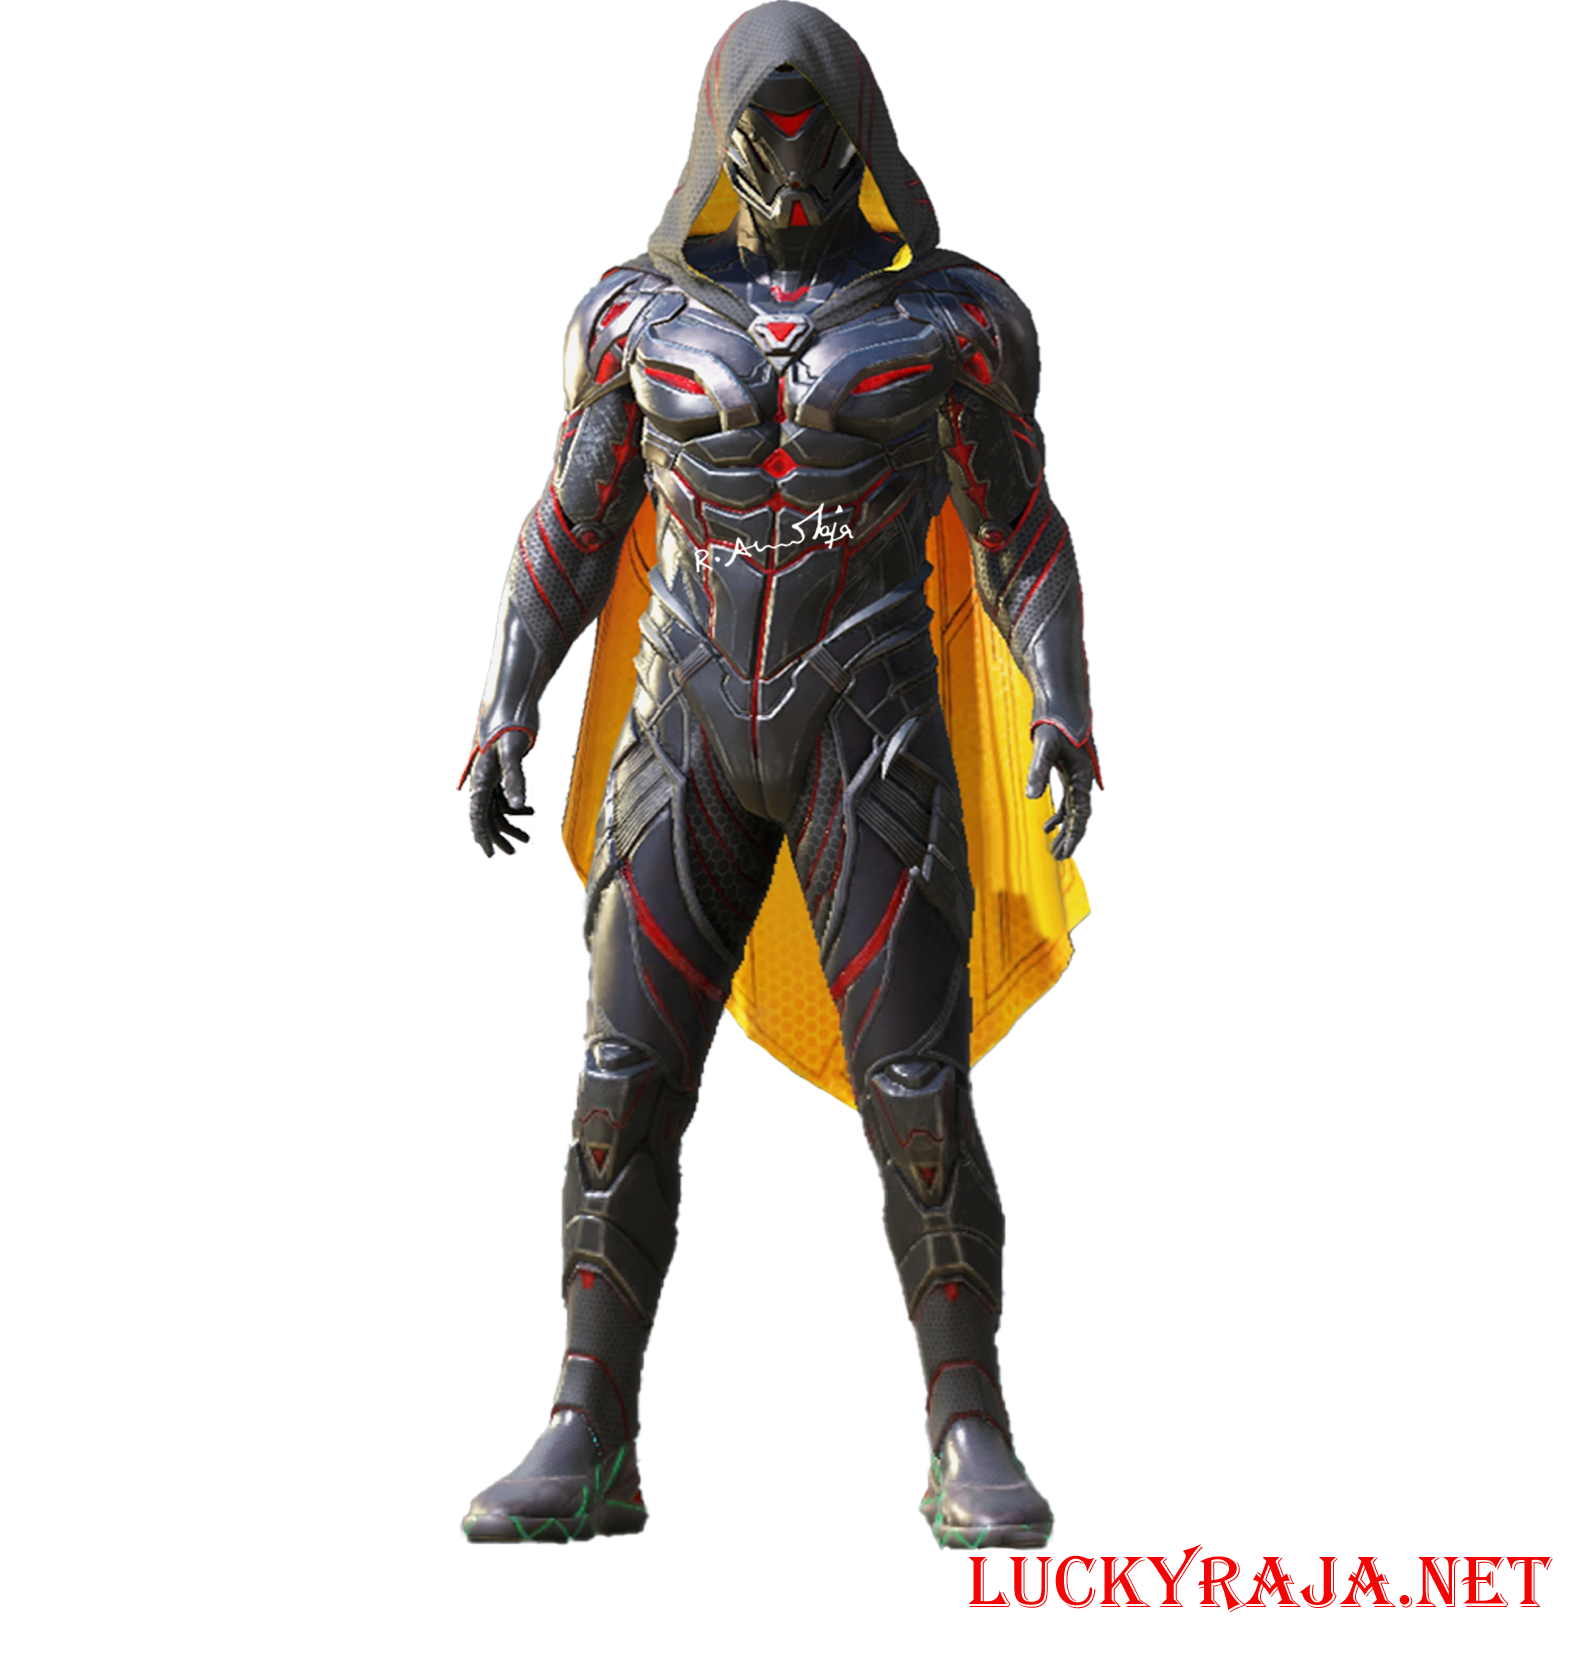 Dragonflame Berserker ,mythic outfit,c4s10 m19 RP outfits,Dragonflame Berserker images,Dragonflame Berserker pubg mobile,Dragonflame Berserker outfit,pubg mobile outfits,animation,cartoon images